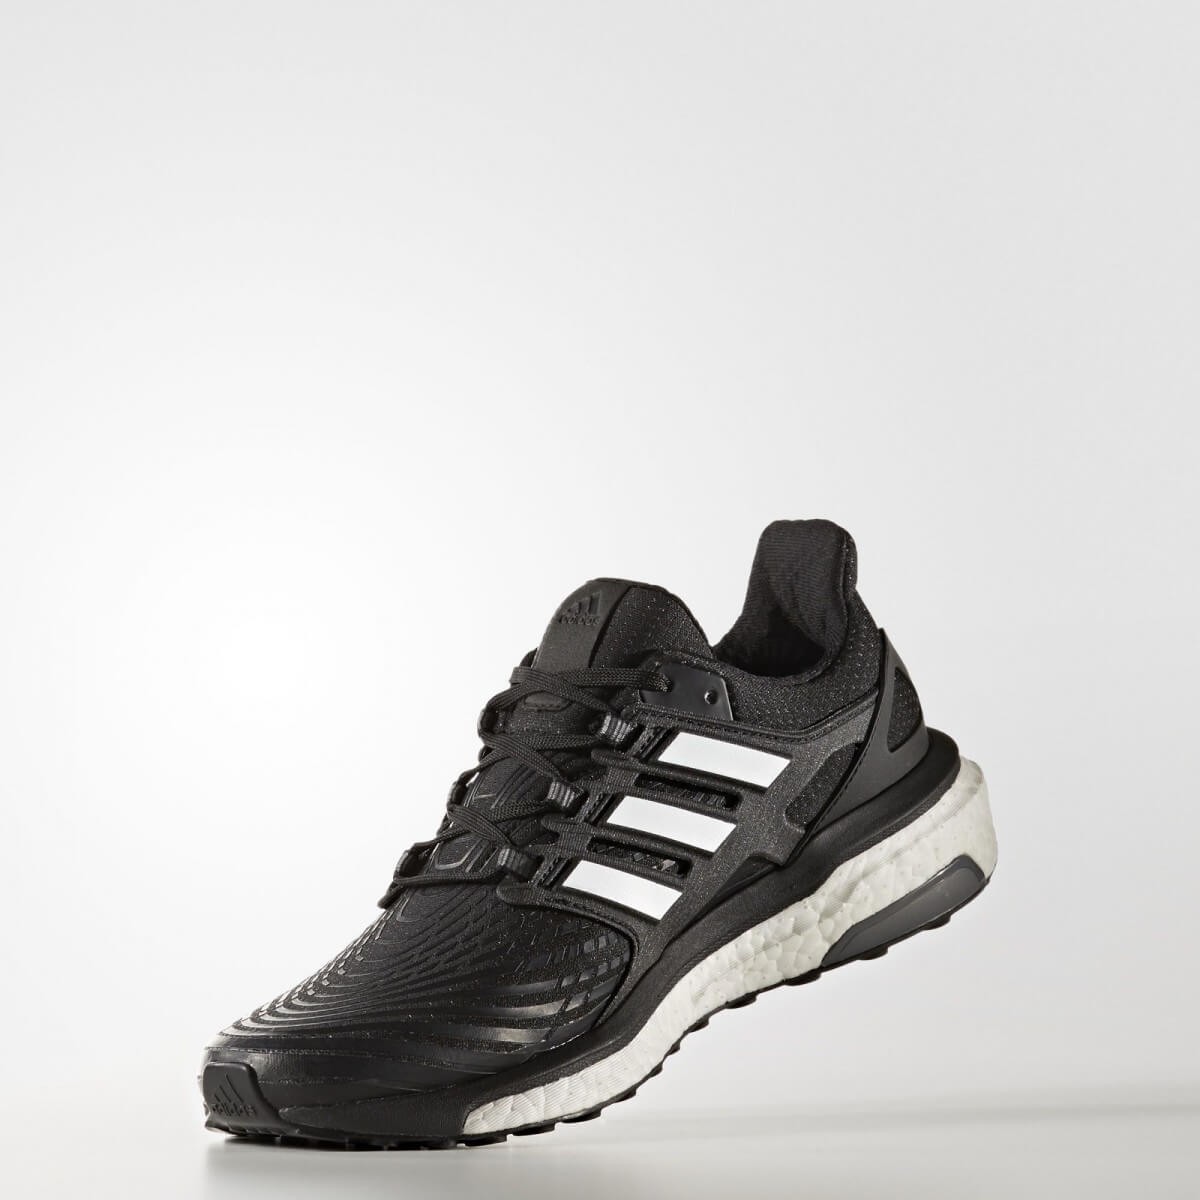 Running Adidas Energy Boost color black woman